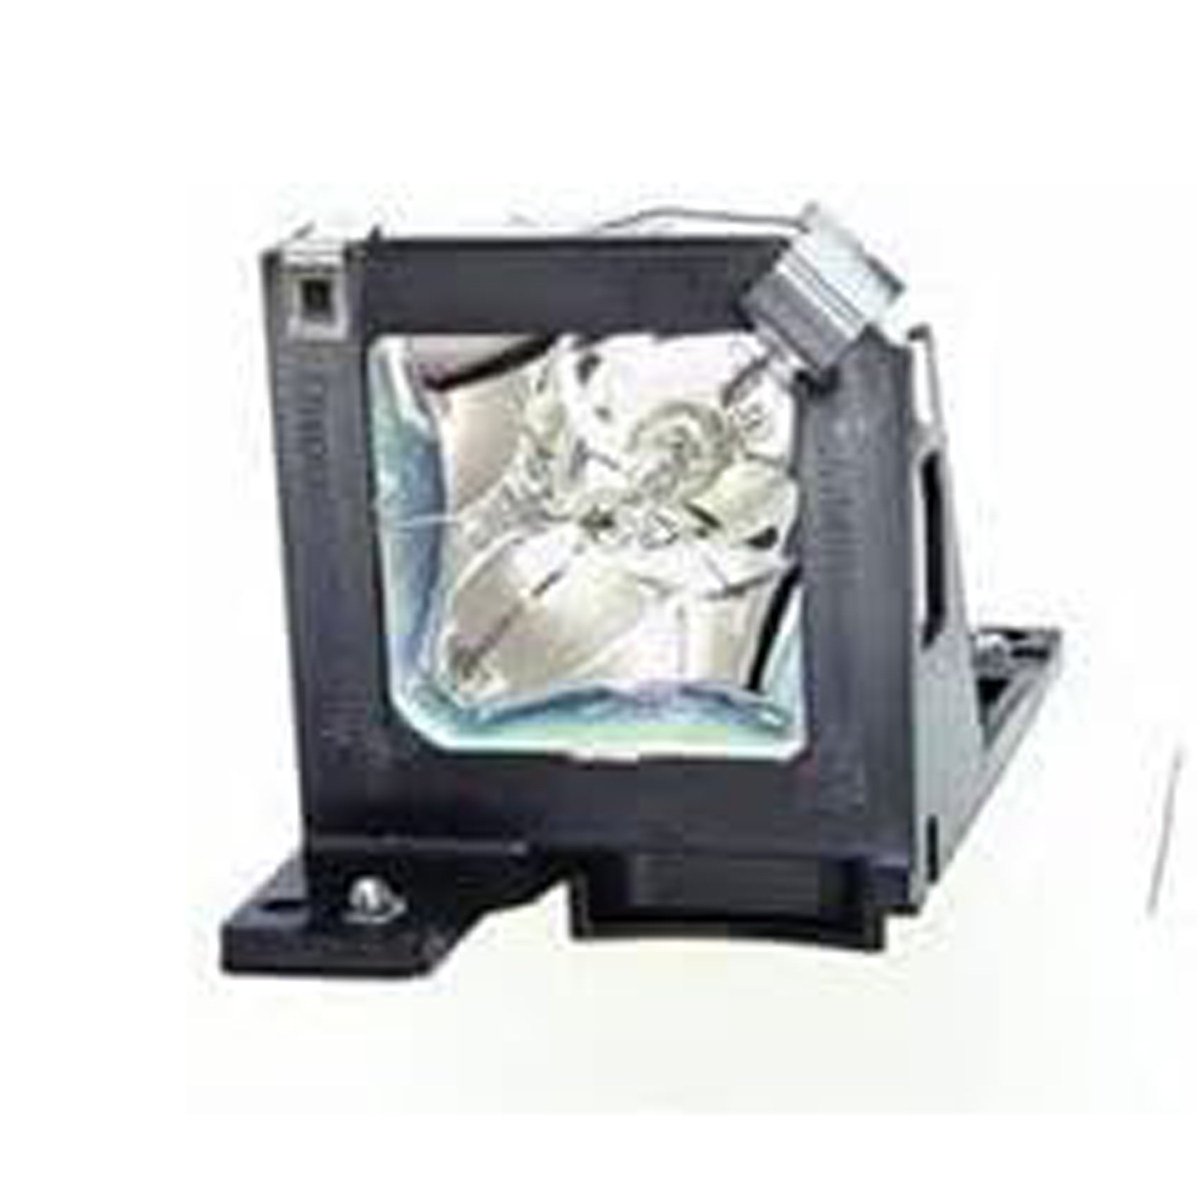 Replacement Projector lamp ELPLP19 For Epson EMP-30